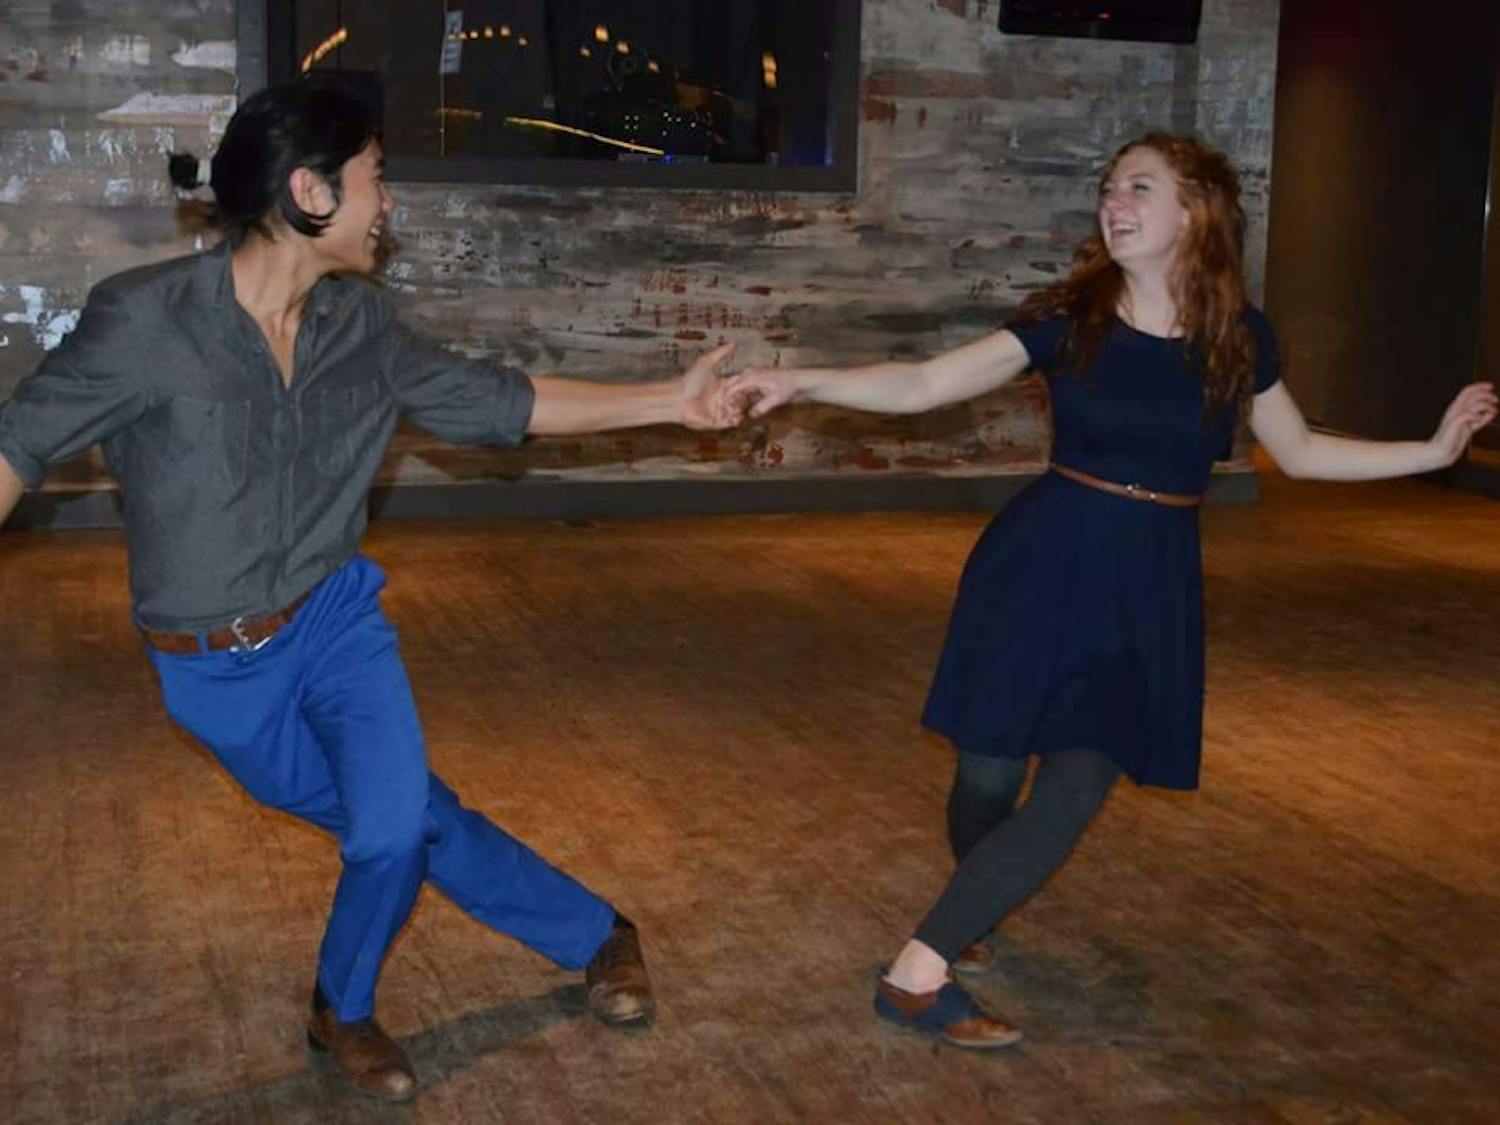 Jonathan Ng and Gillian Fortier, the founders of Prohibition Night, also teach swing dancing at the Prohibition Night events. Photo courtesy of Gillian Fortier.